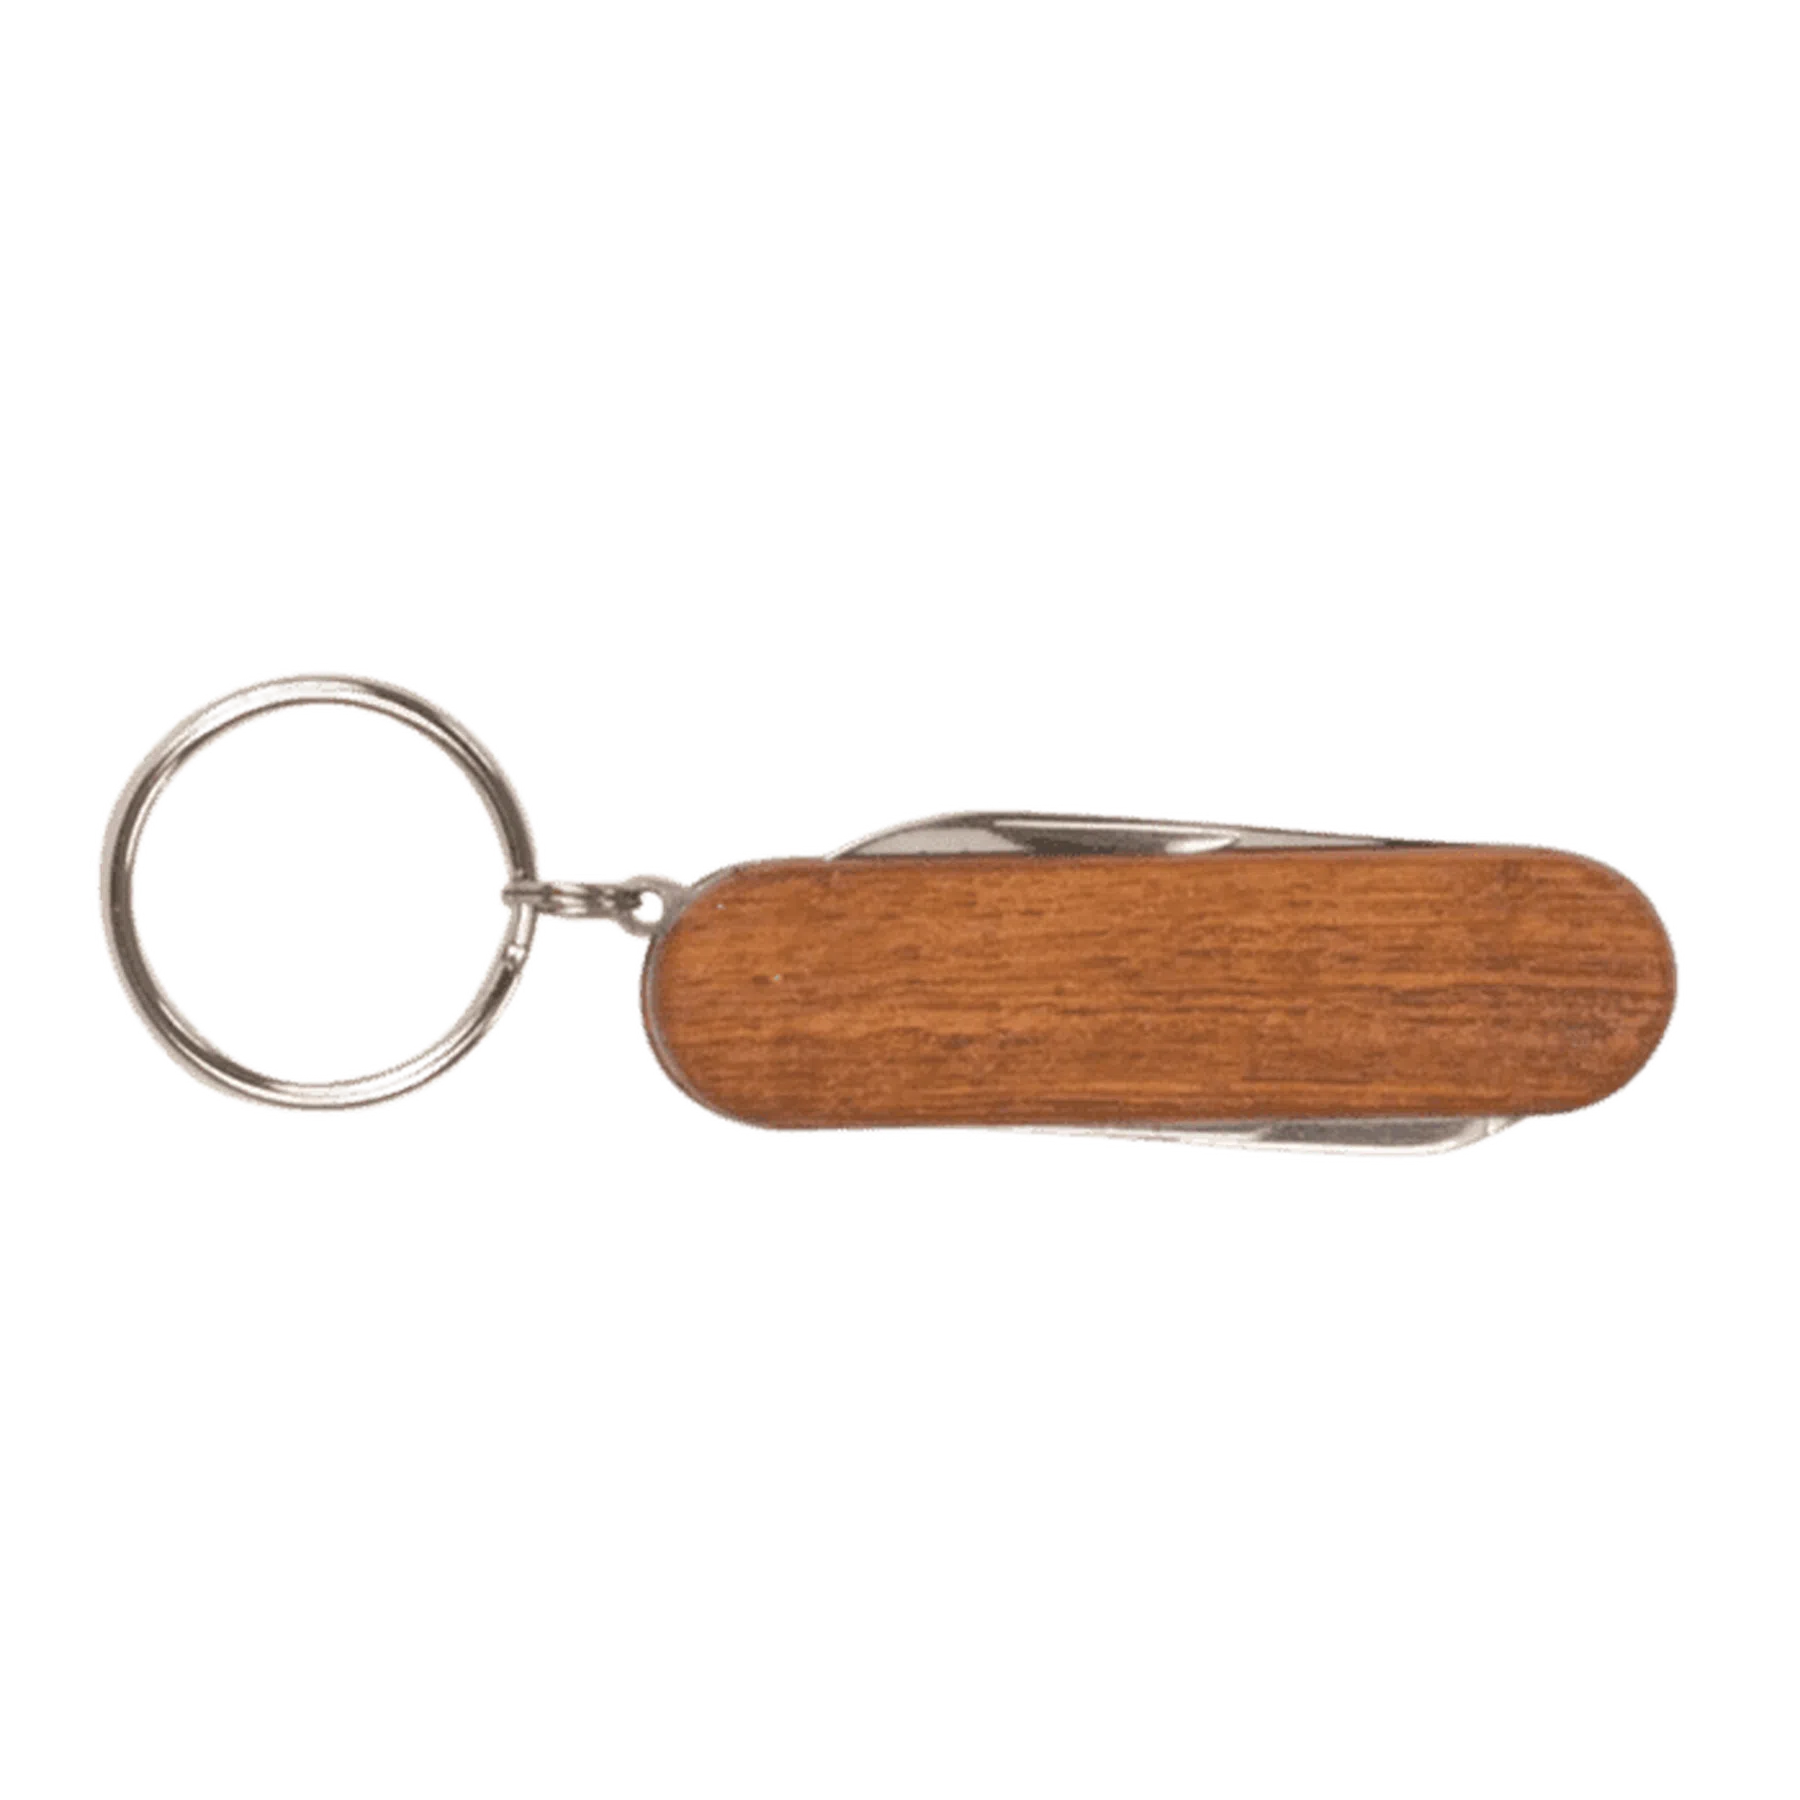 Small 2 1/4" Wooden 3-Function Pocket Knife with Keychain